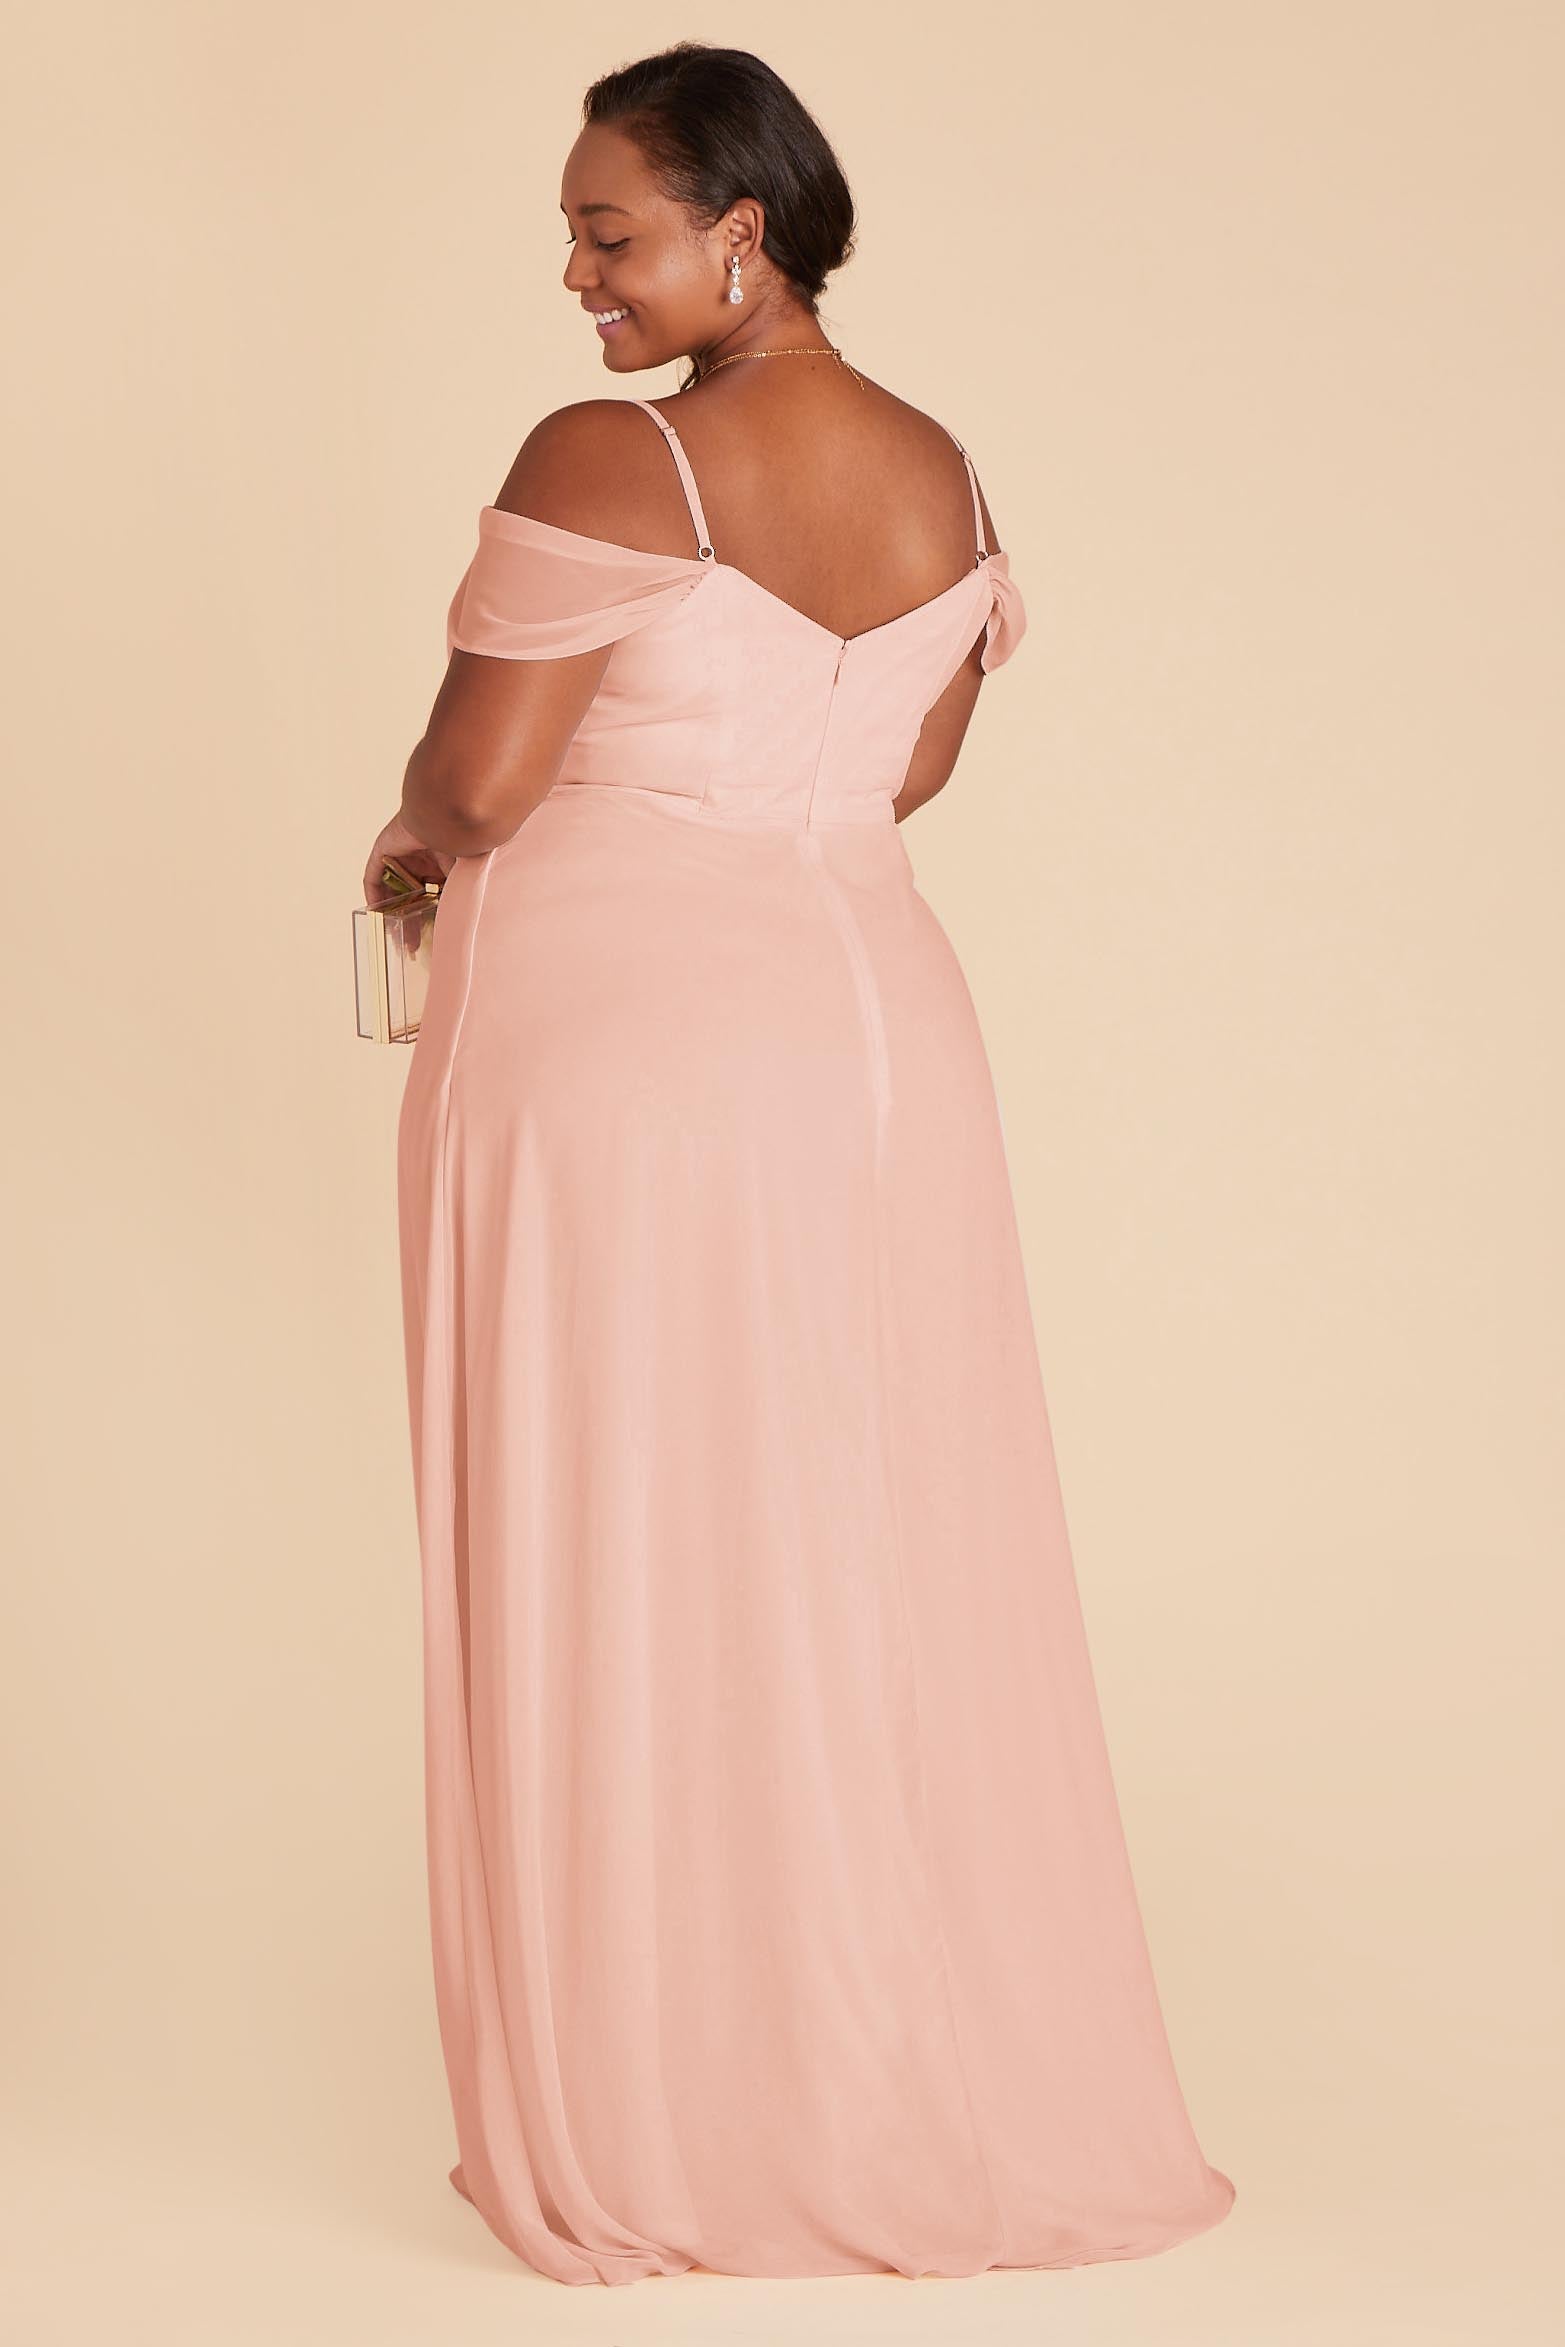 Blush Pink Spence Convertible Dress by Birdy Grey